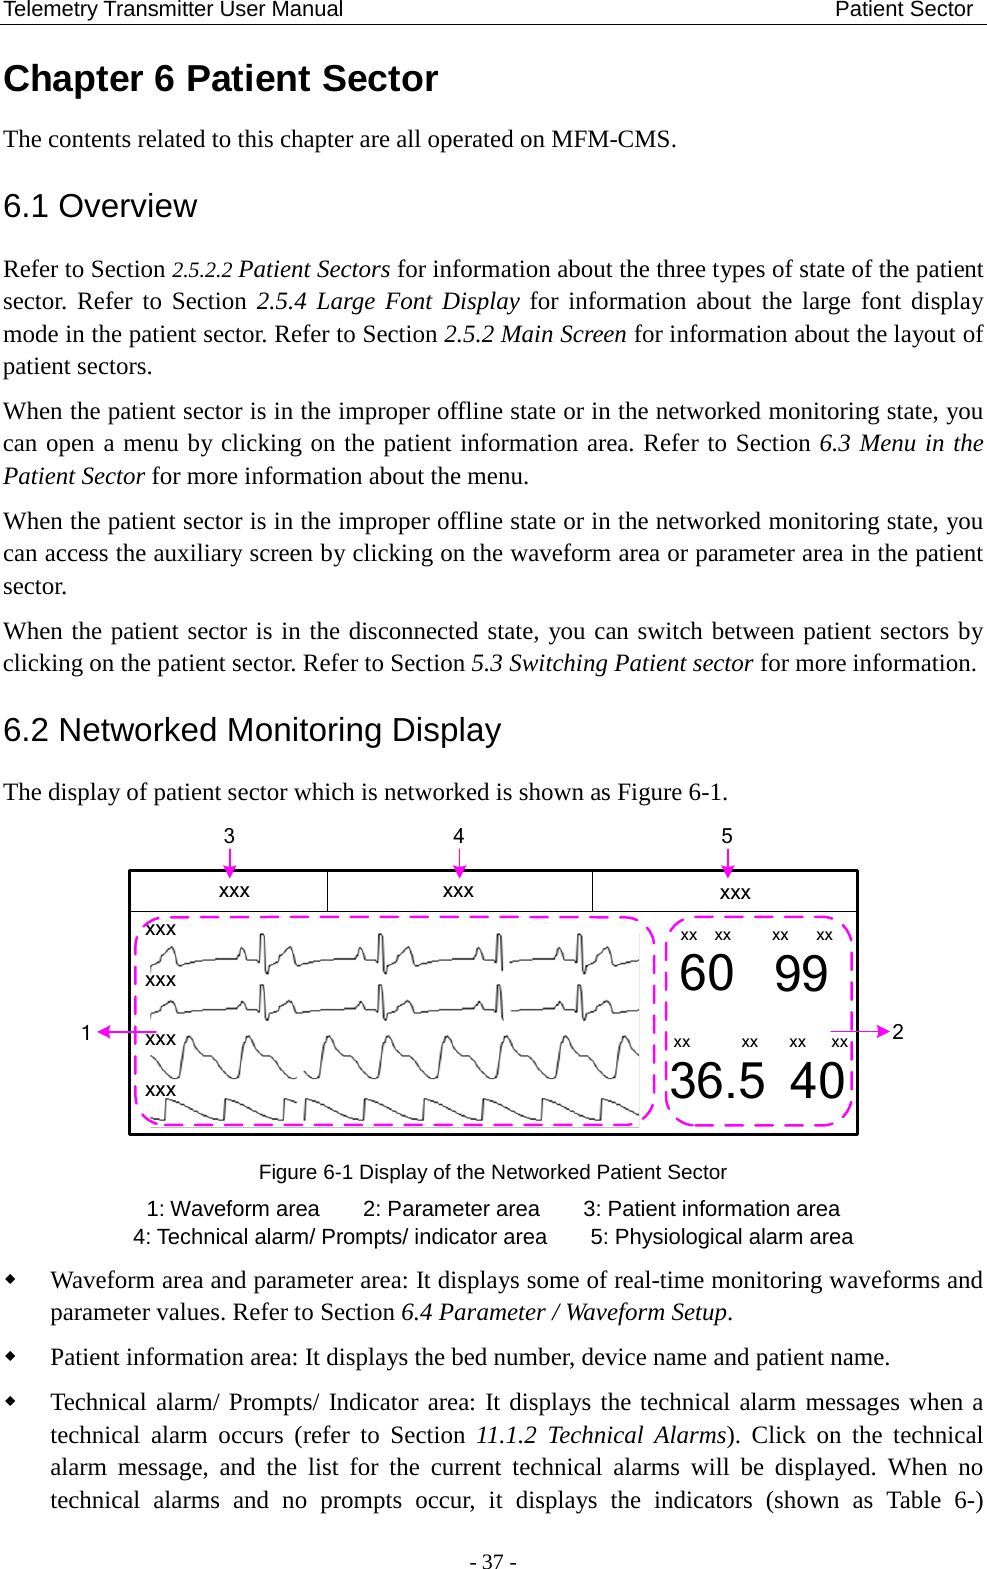 Telemetry Transmitter User Manual                                             Patient Sector Chapter 6 Patient Sector The contents related to this chapter are all operated on MFM-CMS. 6.1 Overview   Refer to Section 2.5.2.2 Patient Sectors for information about the three types of state of the patient sector. Refer to Section 2.5.4 Large Font Display for information about the large font display mode in the patient sector. Refer to Section 2.5.2 Main Screen for information about the layout of patient sectors.   When the patient sector is in the improper offline state or in the networked monitoring state, you can open a menu by clicking on the patient information area. Refer to Section 6.3 Menu in the Patient Sector for more information about the menu. When the patient sector is in the improper offline state or in the networked monitoring state, you can access the auxiliary screen by clicking on the waveform area or parameter area in the patient sector. When the patient sector is in the disconnected state, you can switch between patient sectors by clicking on the patient sector. Refer to Section 5.3 Switching Patient sector for more information. 6.2 Networked Monitoring Display The display of patient sector which is networked is shown as Figure 6-1. xxxxxxxxxxxx60 9936.5 40xx xx xx xxxx xx xx xx3124 5xxx xxx xxx Figure 6-1 Display of the Networked Patient Sector 1: Waveform area        2: Parameter area        3: Patient information area 4: Technical alarm/ Prompts/ indicator area    5: Physiological alarm area  Waveform area and parameter area: It displays some of real-time monitoring waveforms and parameter values. Refer to Section 6.4 Parameter / Waveform Setup.  Patient information area: It displays the bed number, device name and patient name.  Technical alarm/ Prompts/ Indicator area: It displays the technical alarm messages when a technical alarm occurs (refer to Section 11.1.2  Technical  Alarms). Click on the technical alarm message, and the list for the current technical alarms will be displayed. When no technical alarms  and no prompts occur, it displays the indicators (shown as Table  6-)  - 37 - 